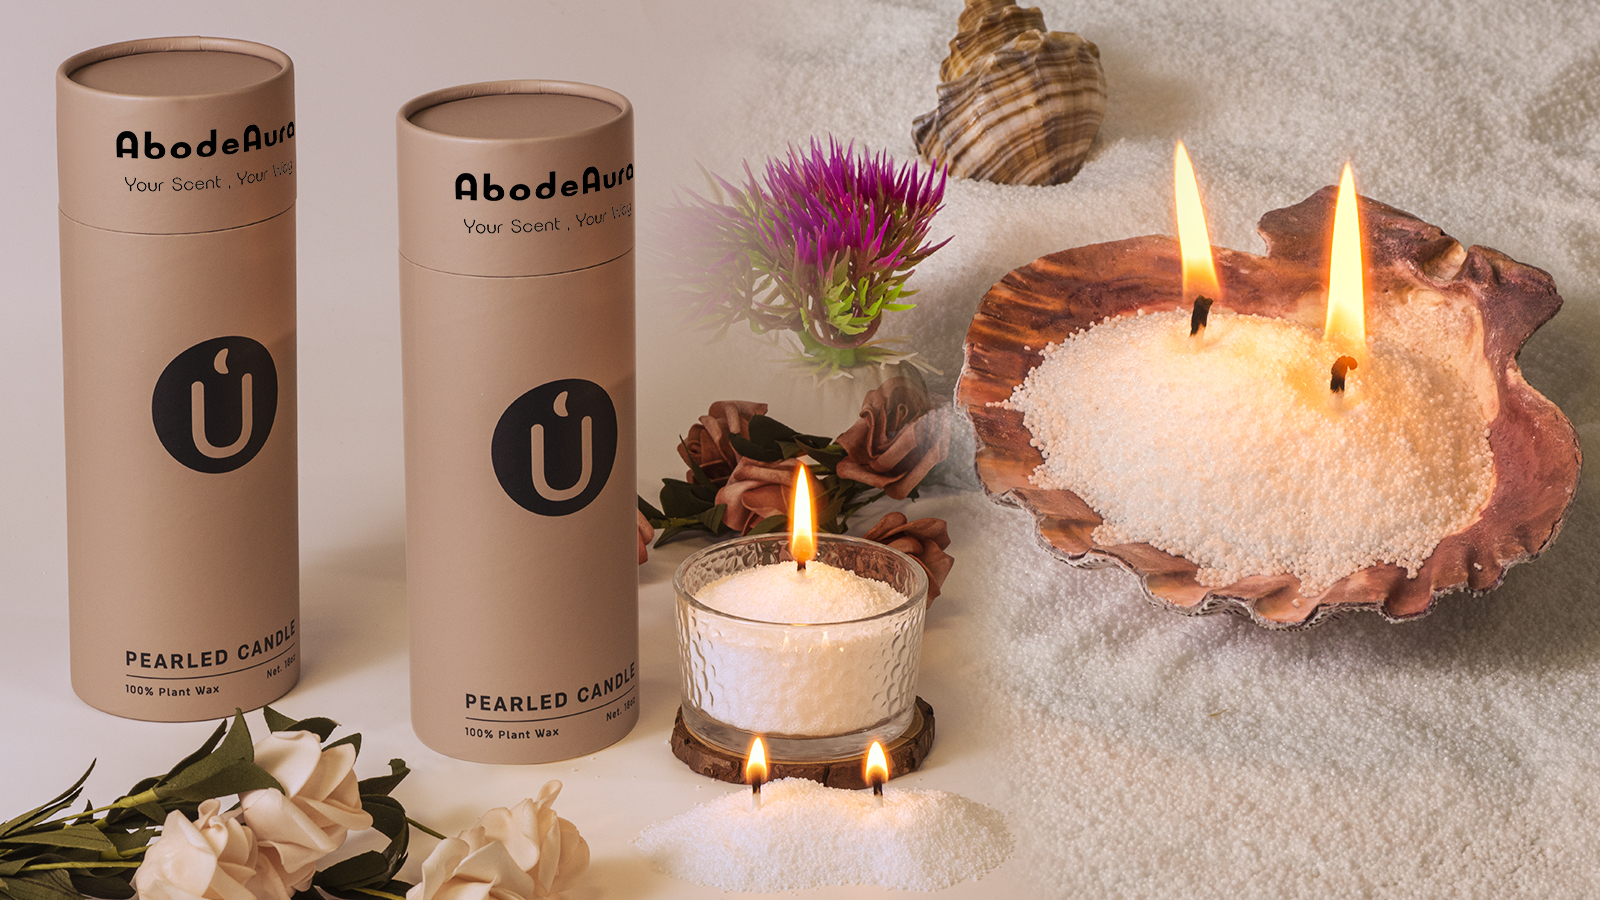 abodeaura pearled candle